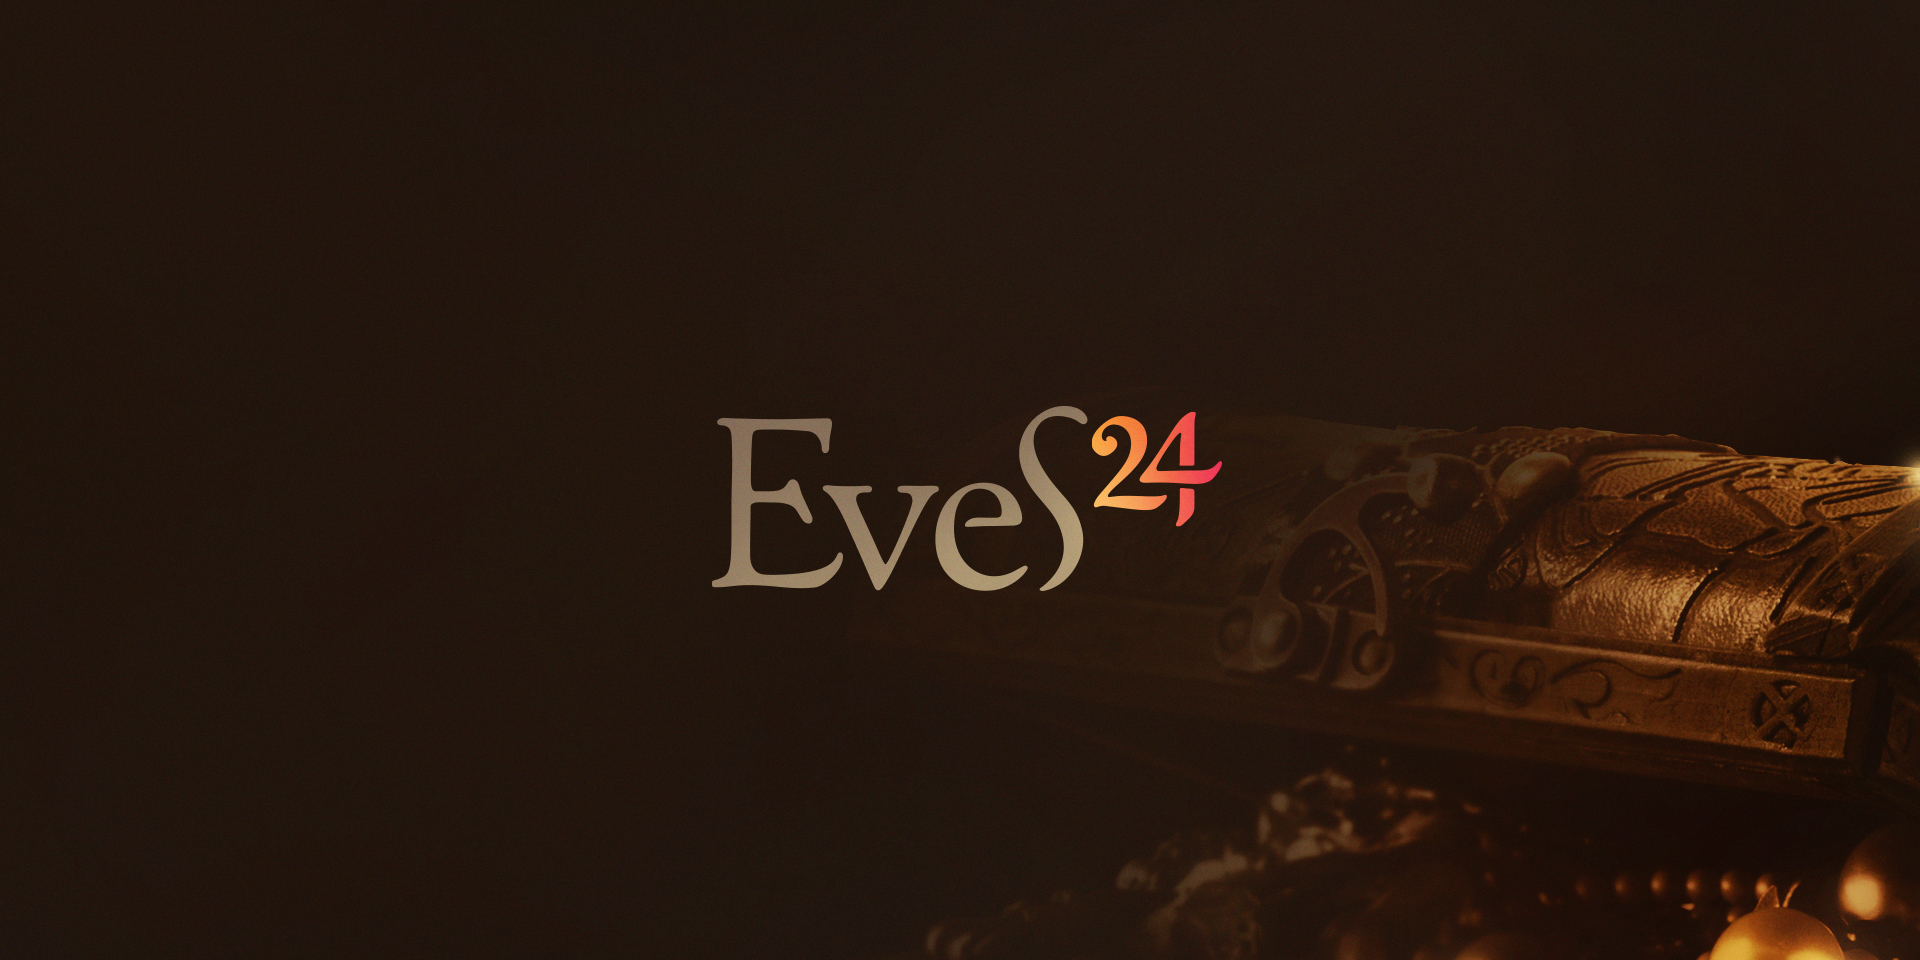 eves24